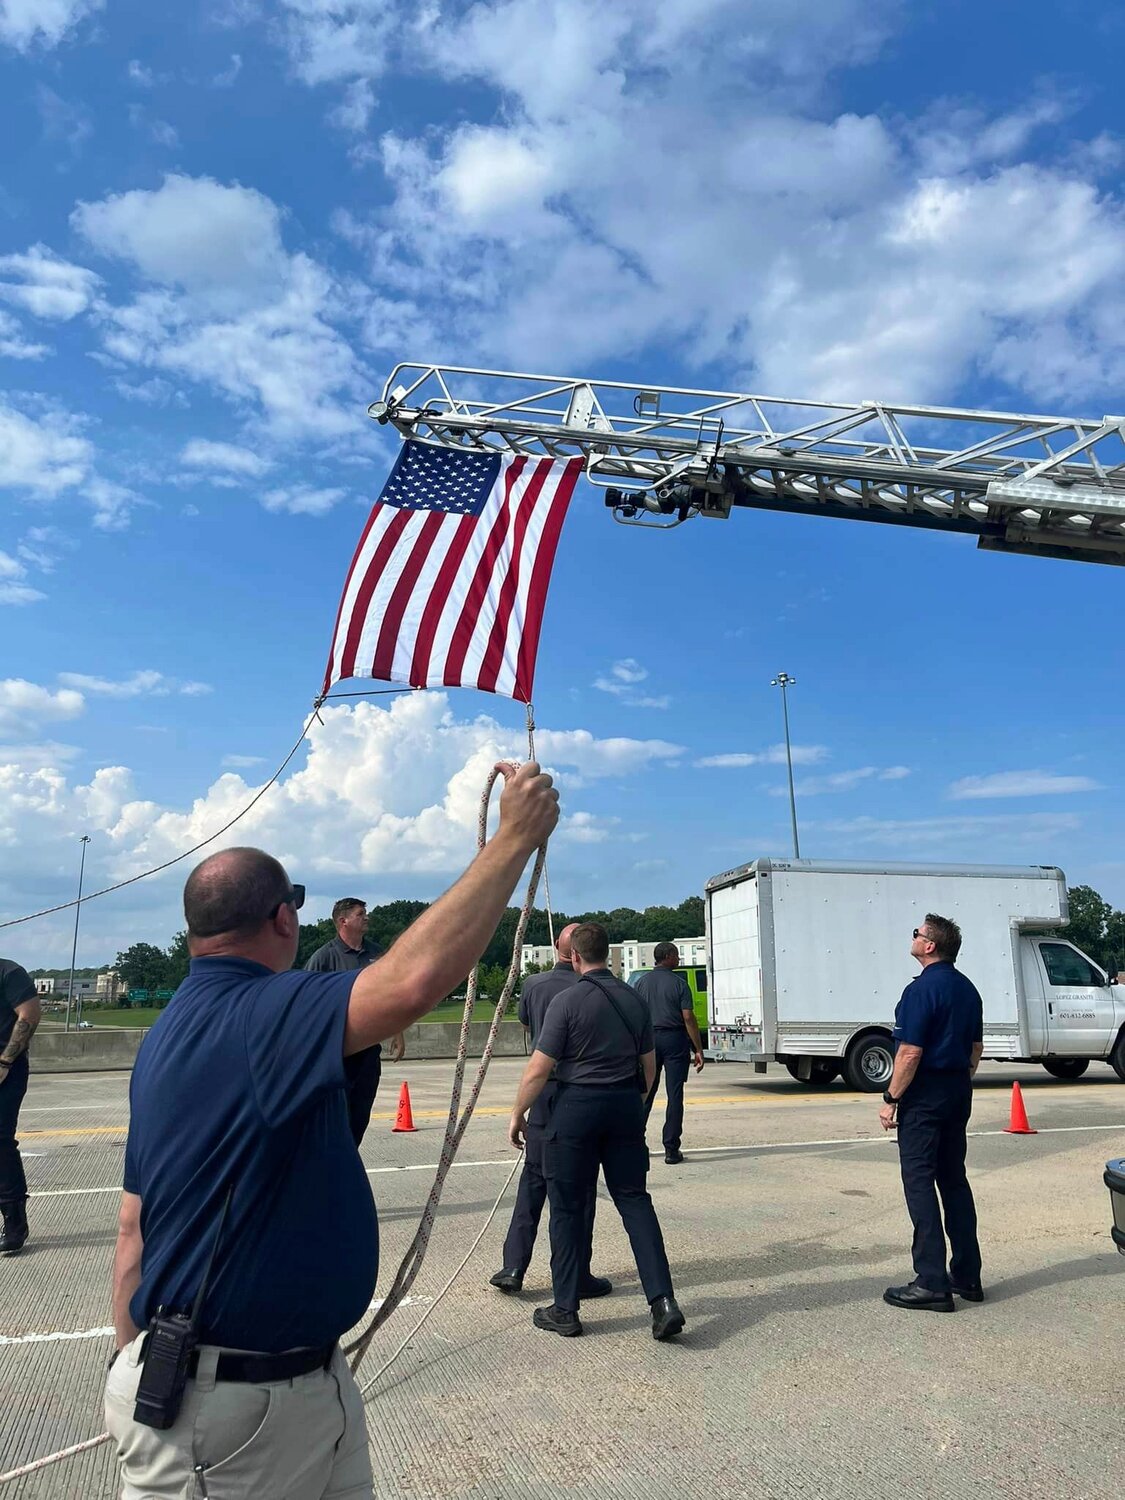 Tyler was transported to the funeral home on June 1. Ridgeland Fire Fighters hoisted a flag on one of their ladder trucks along the route in his honor.

“We were blessed to honor Madison Police Officer Randy Tyler during the procession to the funeral home today,” A social media statement from RFD reads. “thank you for your ultimate sacrifice and your years of dedication to making this world safer.”